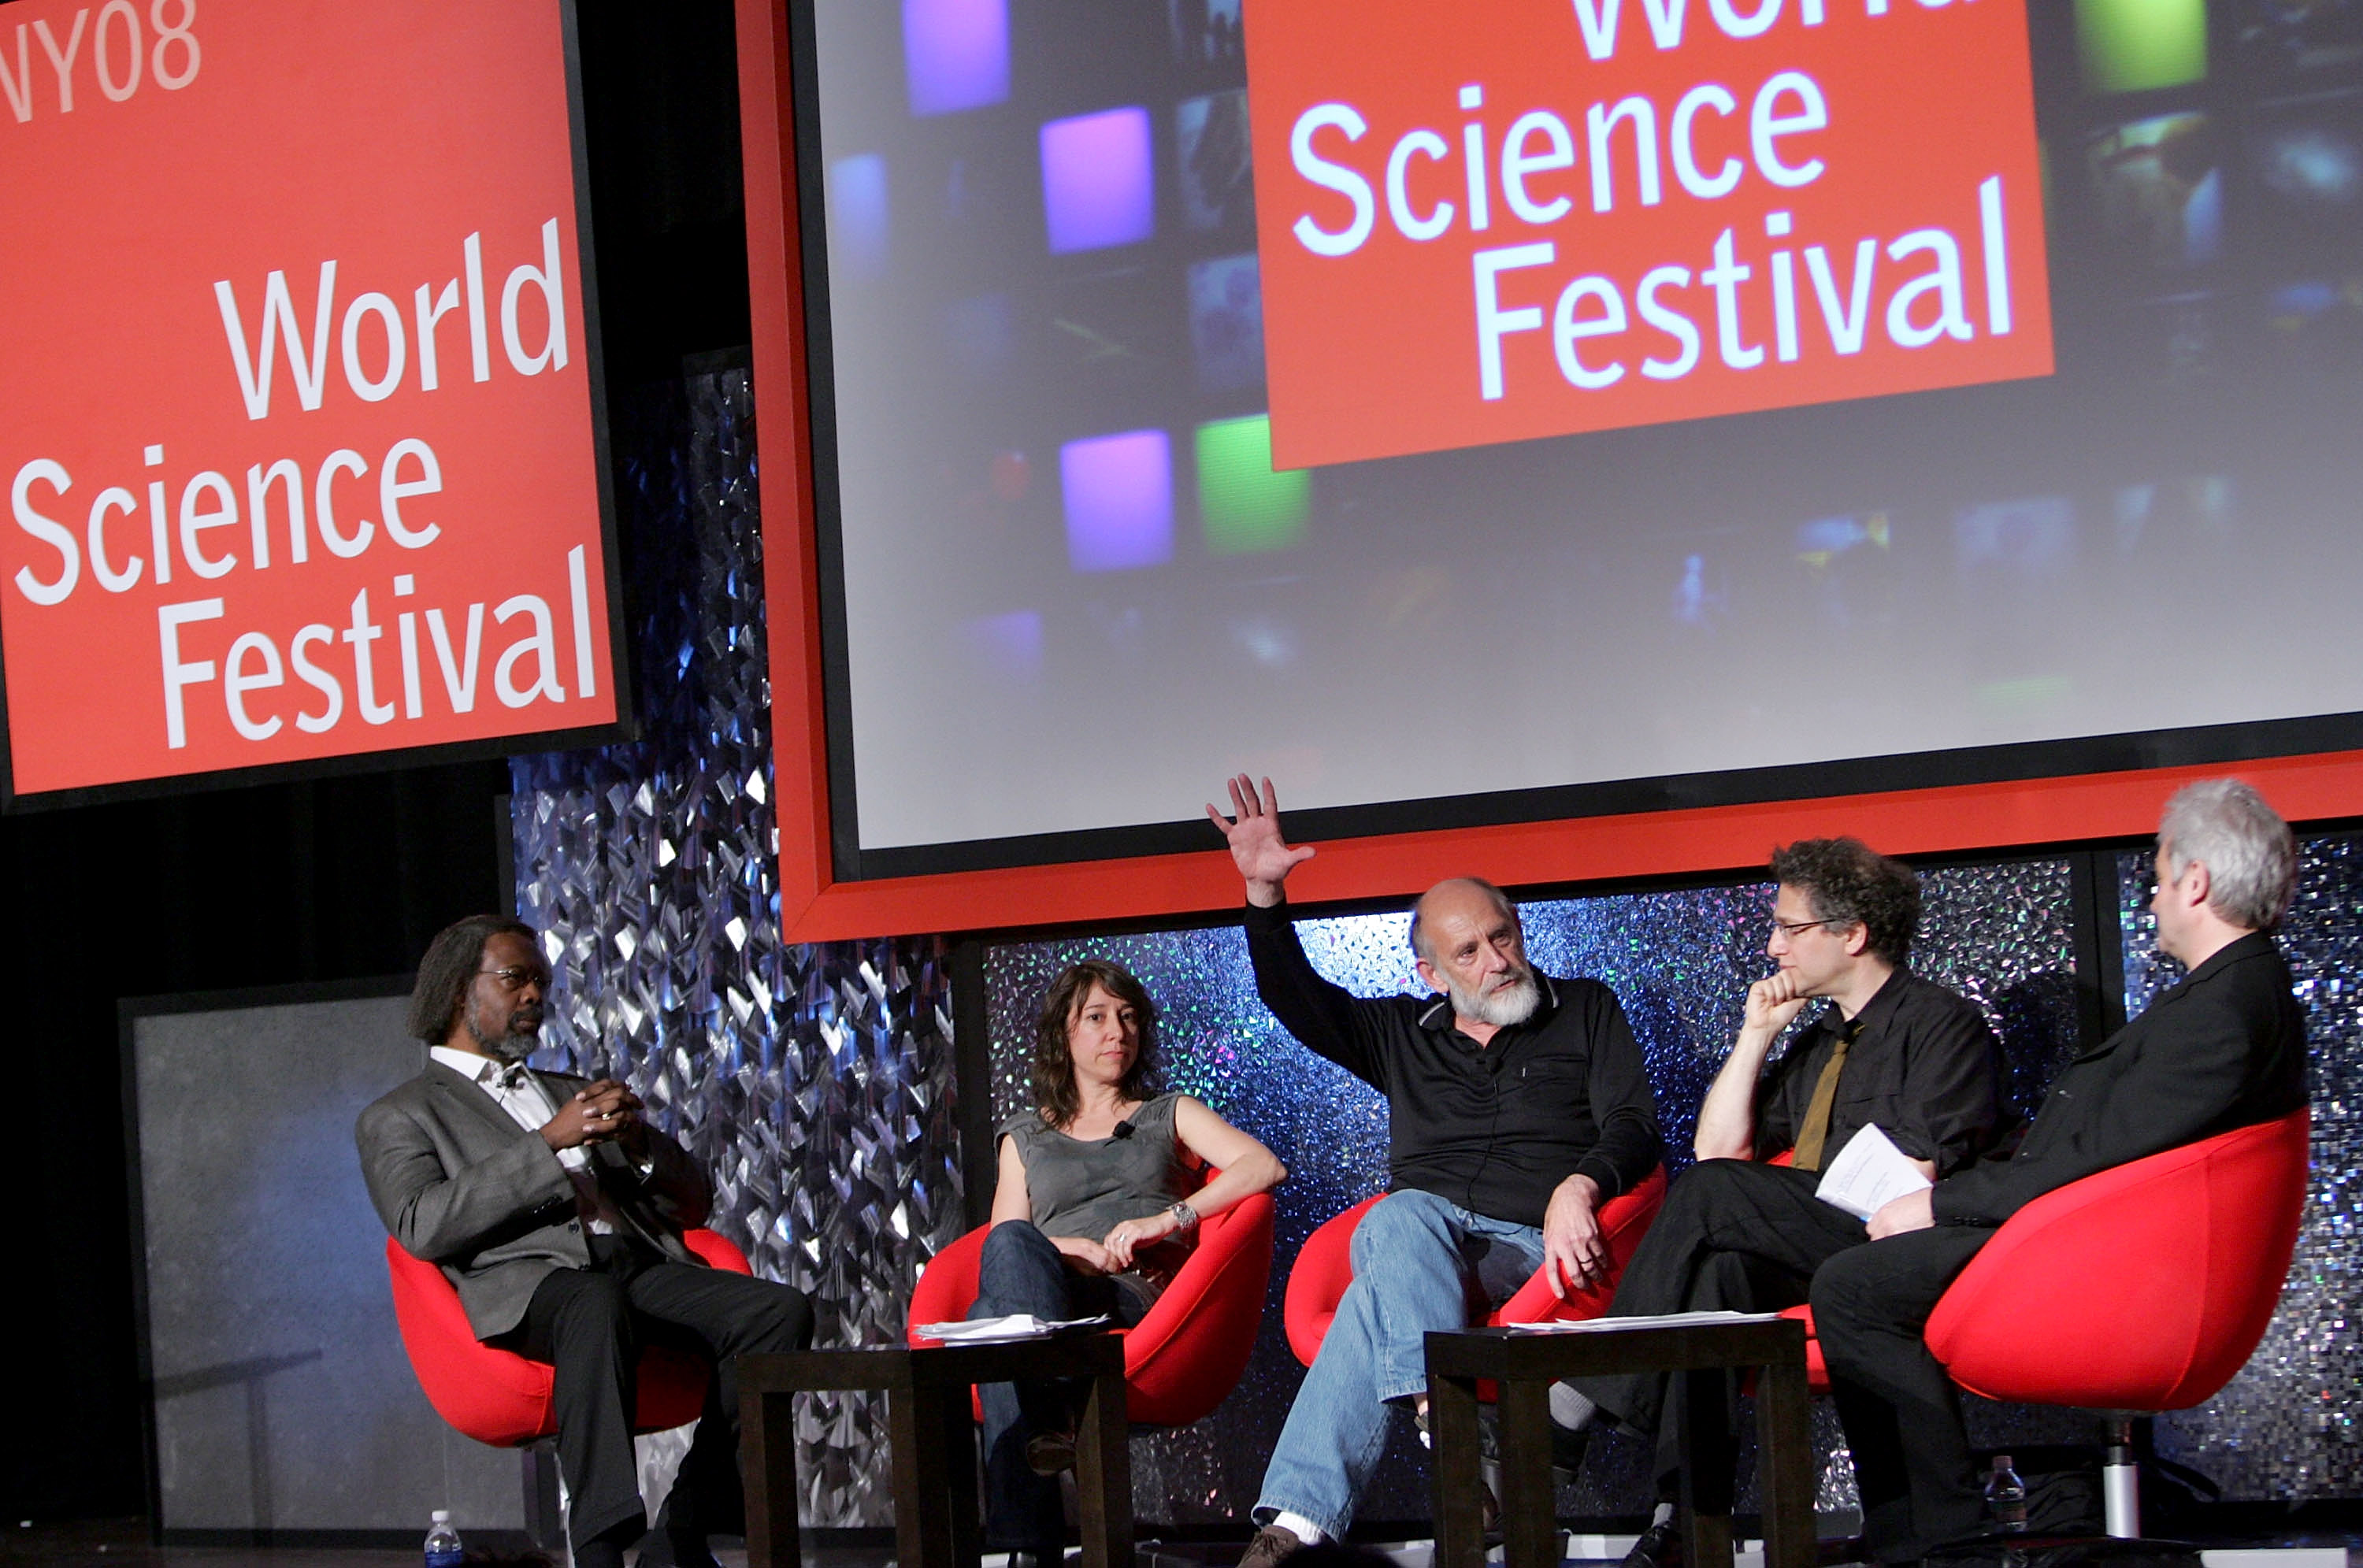 (credit: Thos Robinson/Getty Images for World Science Festival)